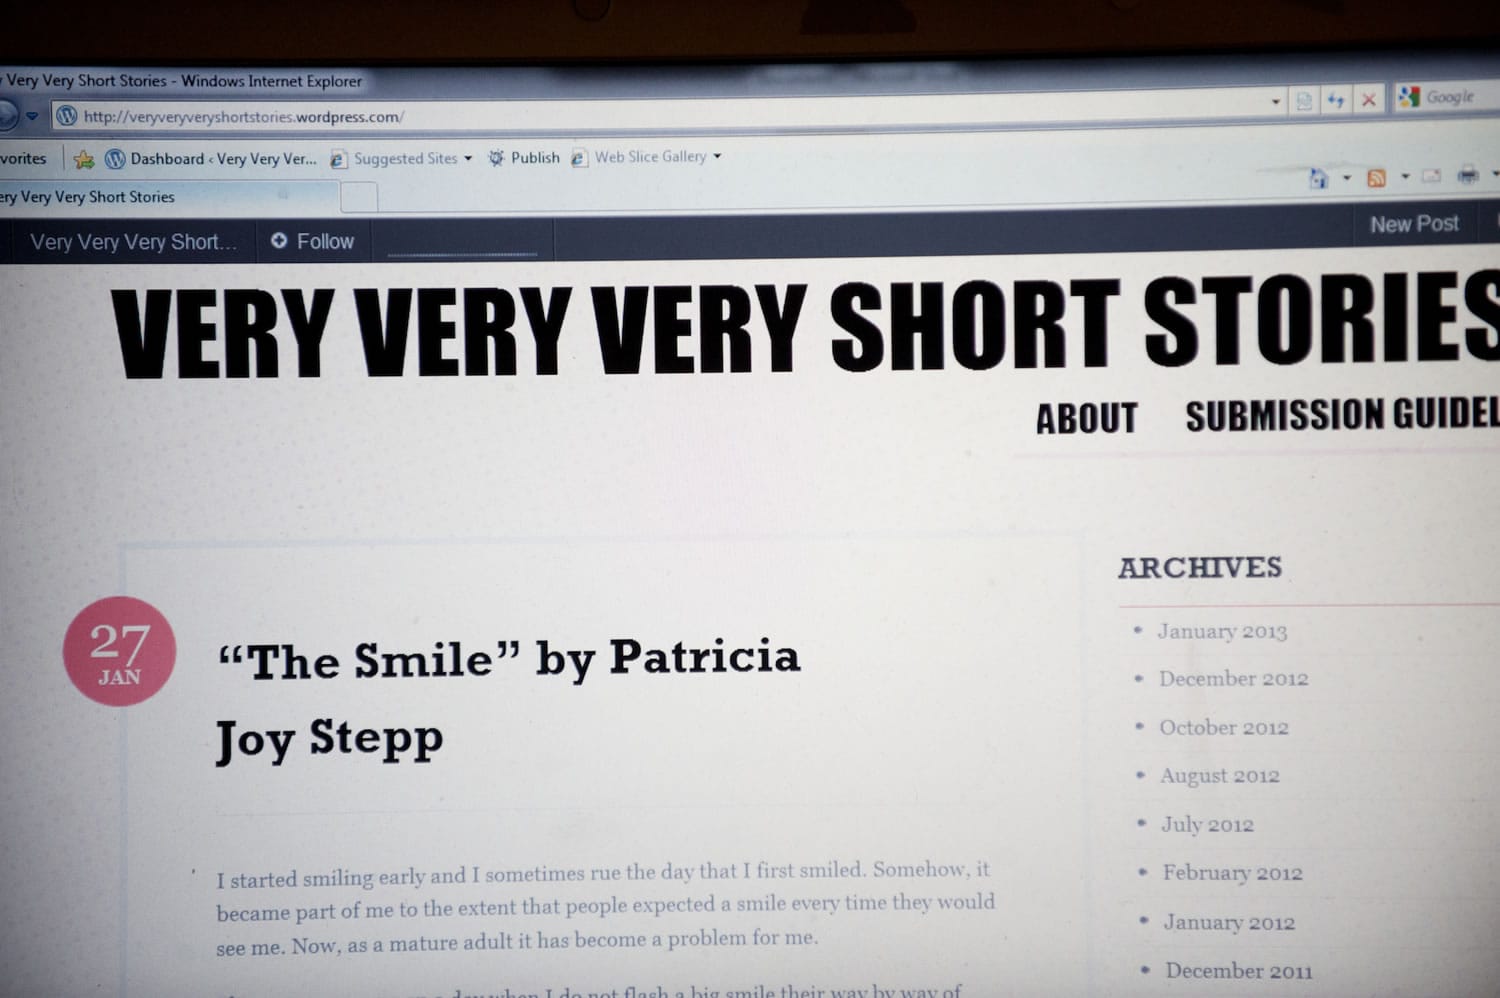 A short story called &quot;The Smile&quot; by Patricia Joy Stepp is posted on the blog &quot;Very Very Very Short Stories.&quot;